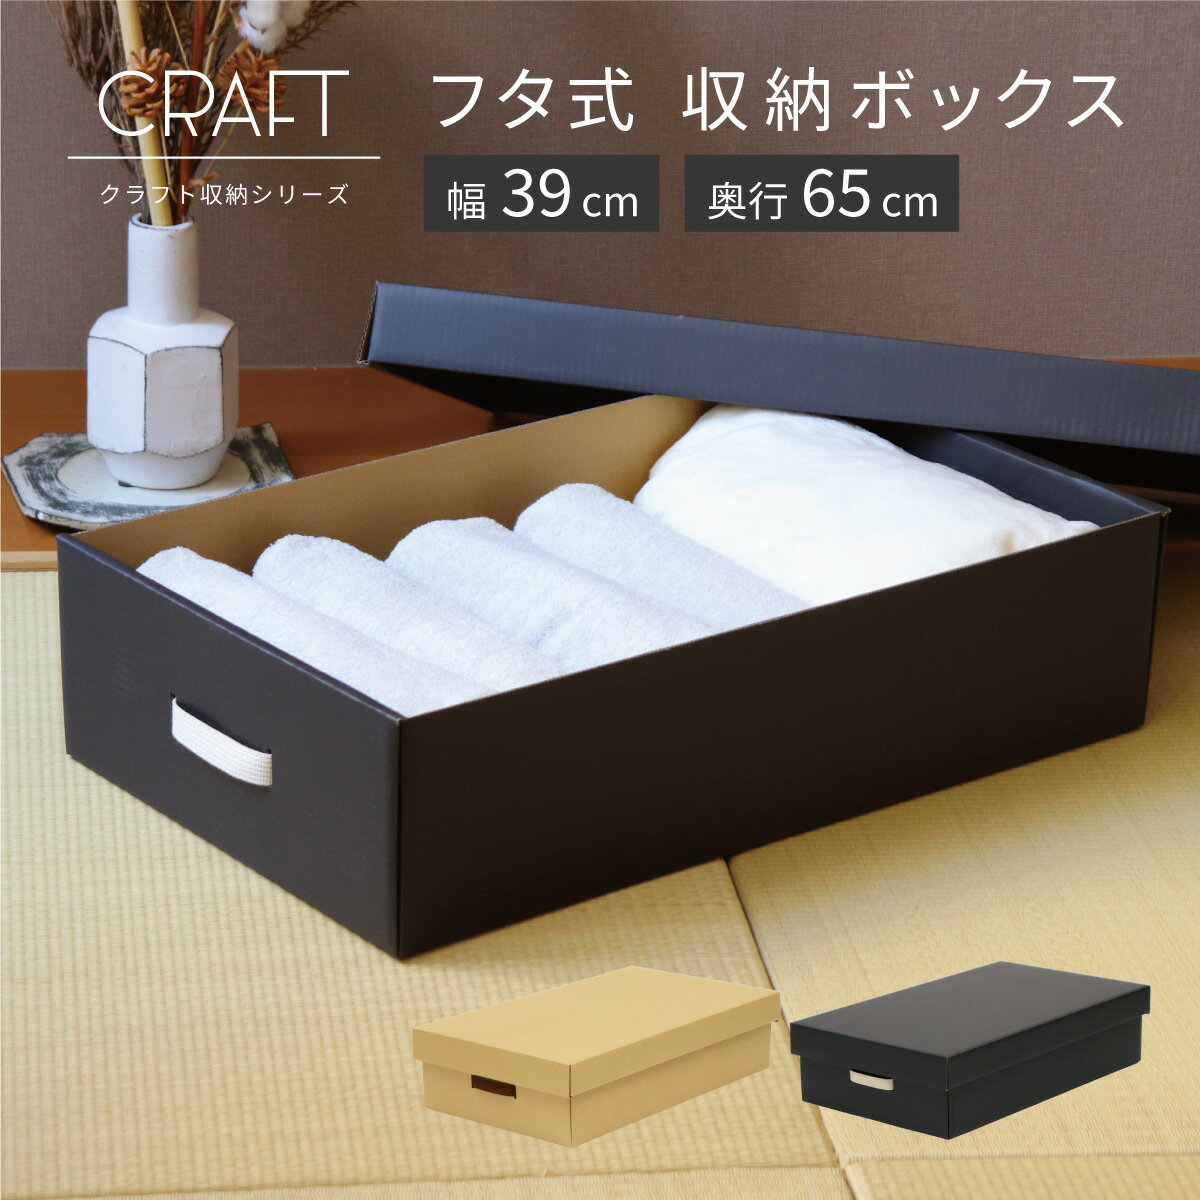 CRAFT 押入れ用 フタ式 収納ボックス 